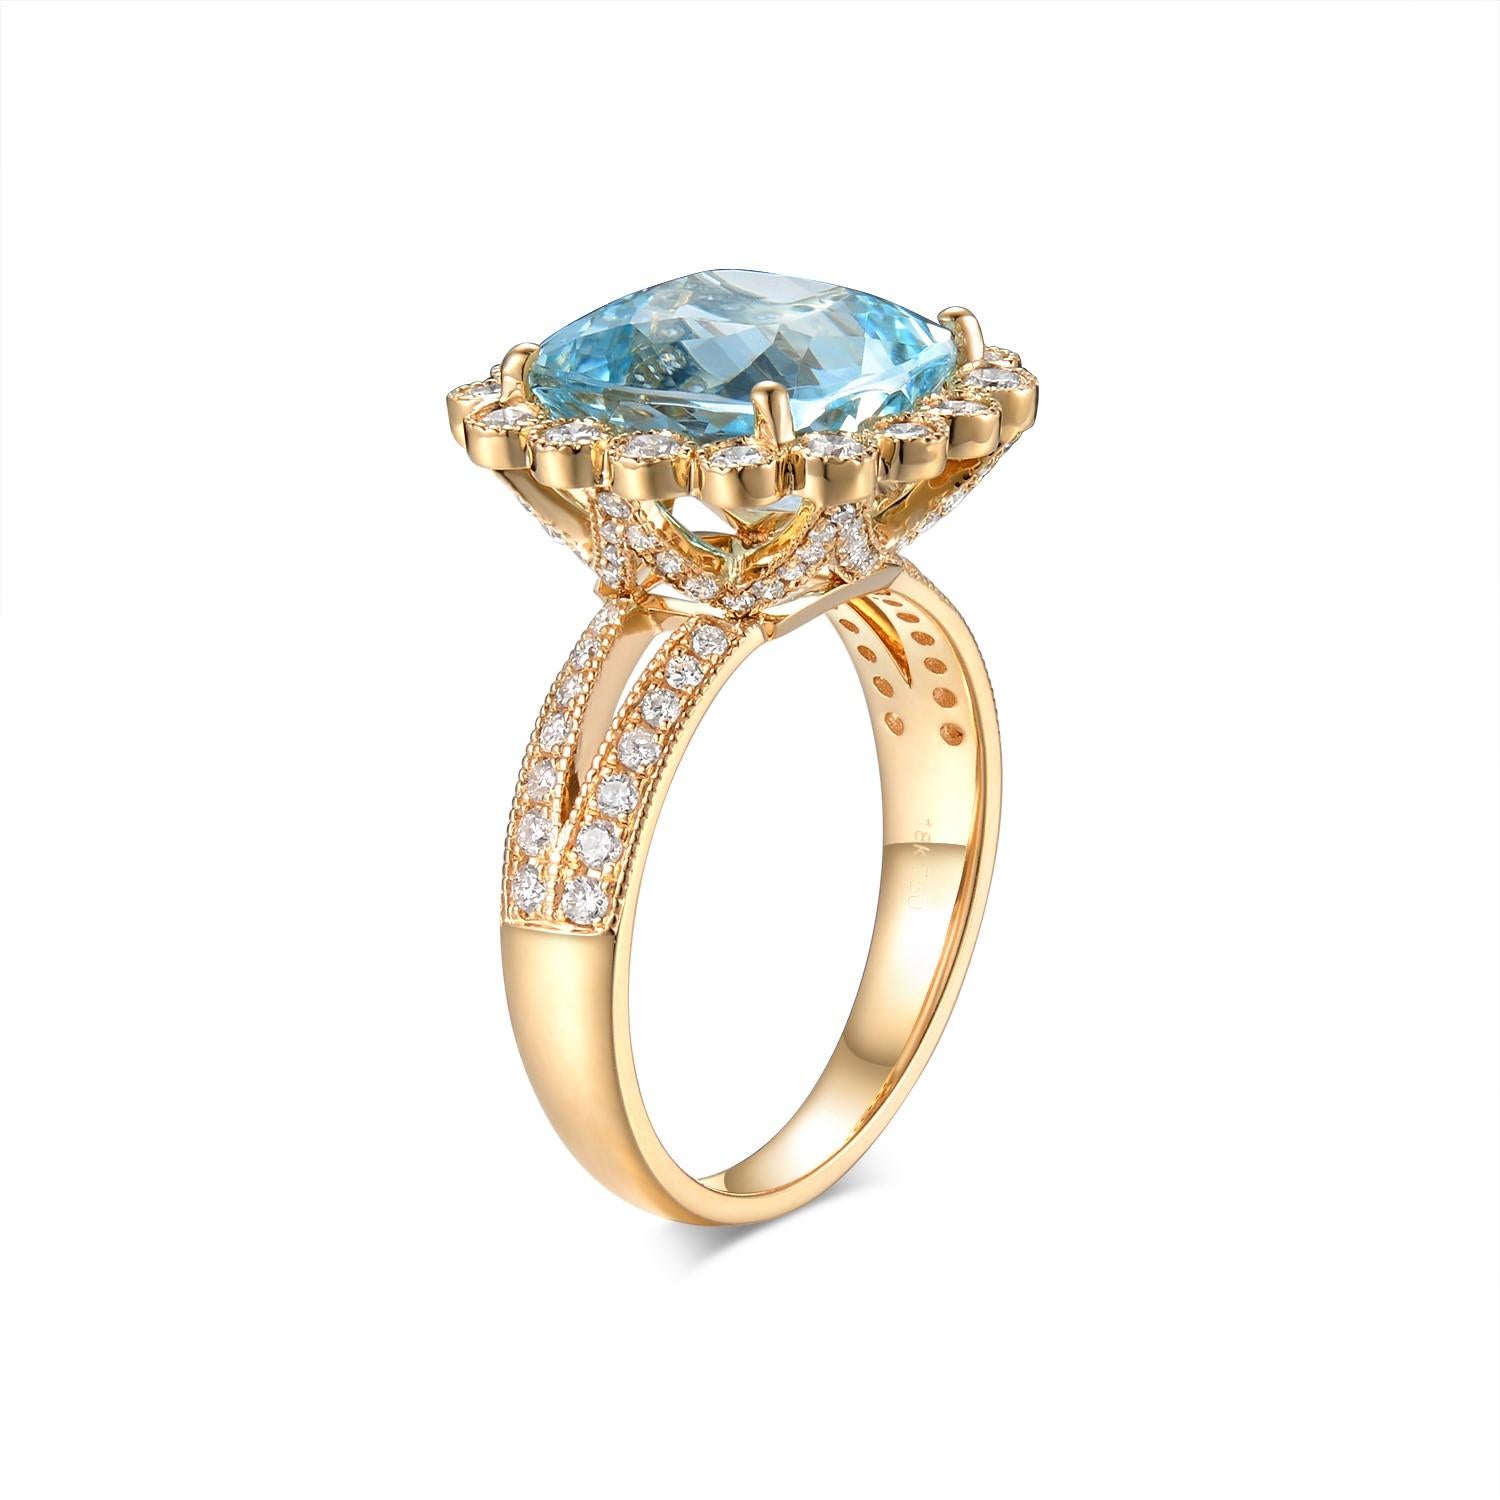 Showcase elegance with this beautifully crafted ring, centered around a mesmerizing 4.32-carat aquamarine. The brilliance of the aquamarine is complemented by a generous assent of diamonds, weighing in at 0.74 carats, offering a stunning contrast